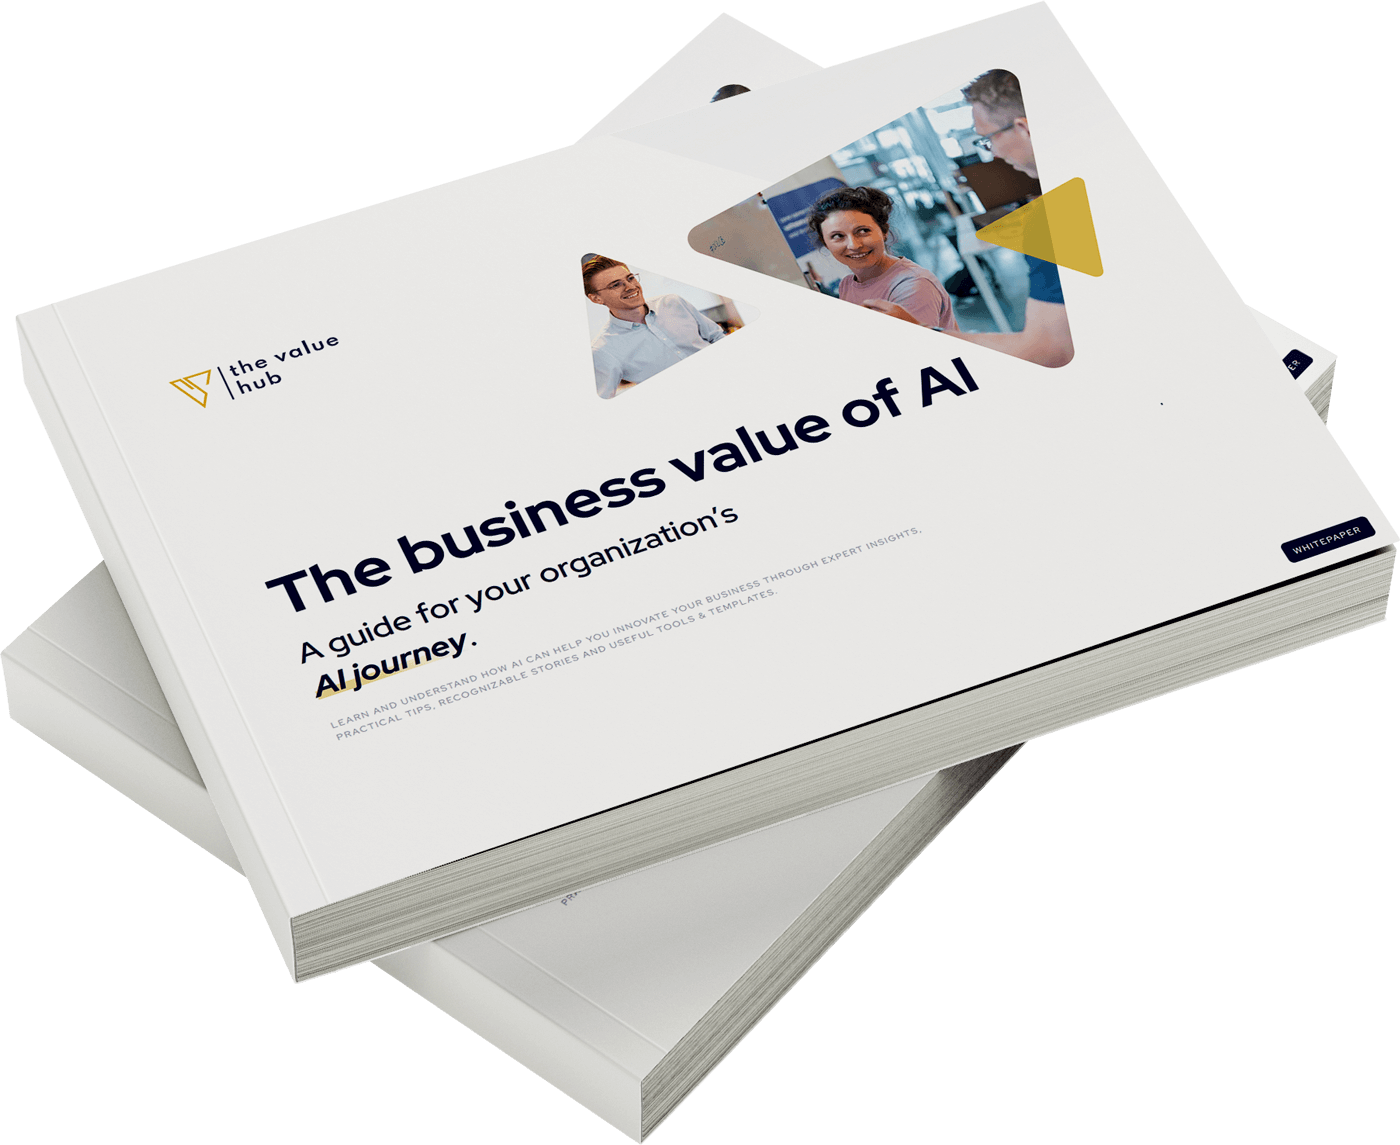 Example of the printed The business value of AI guide